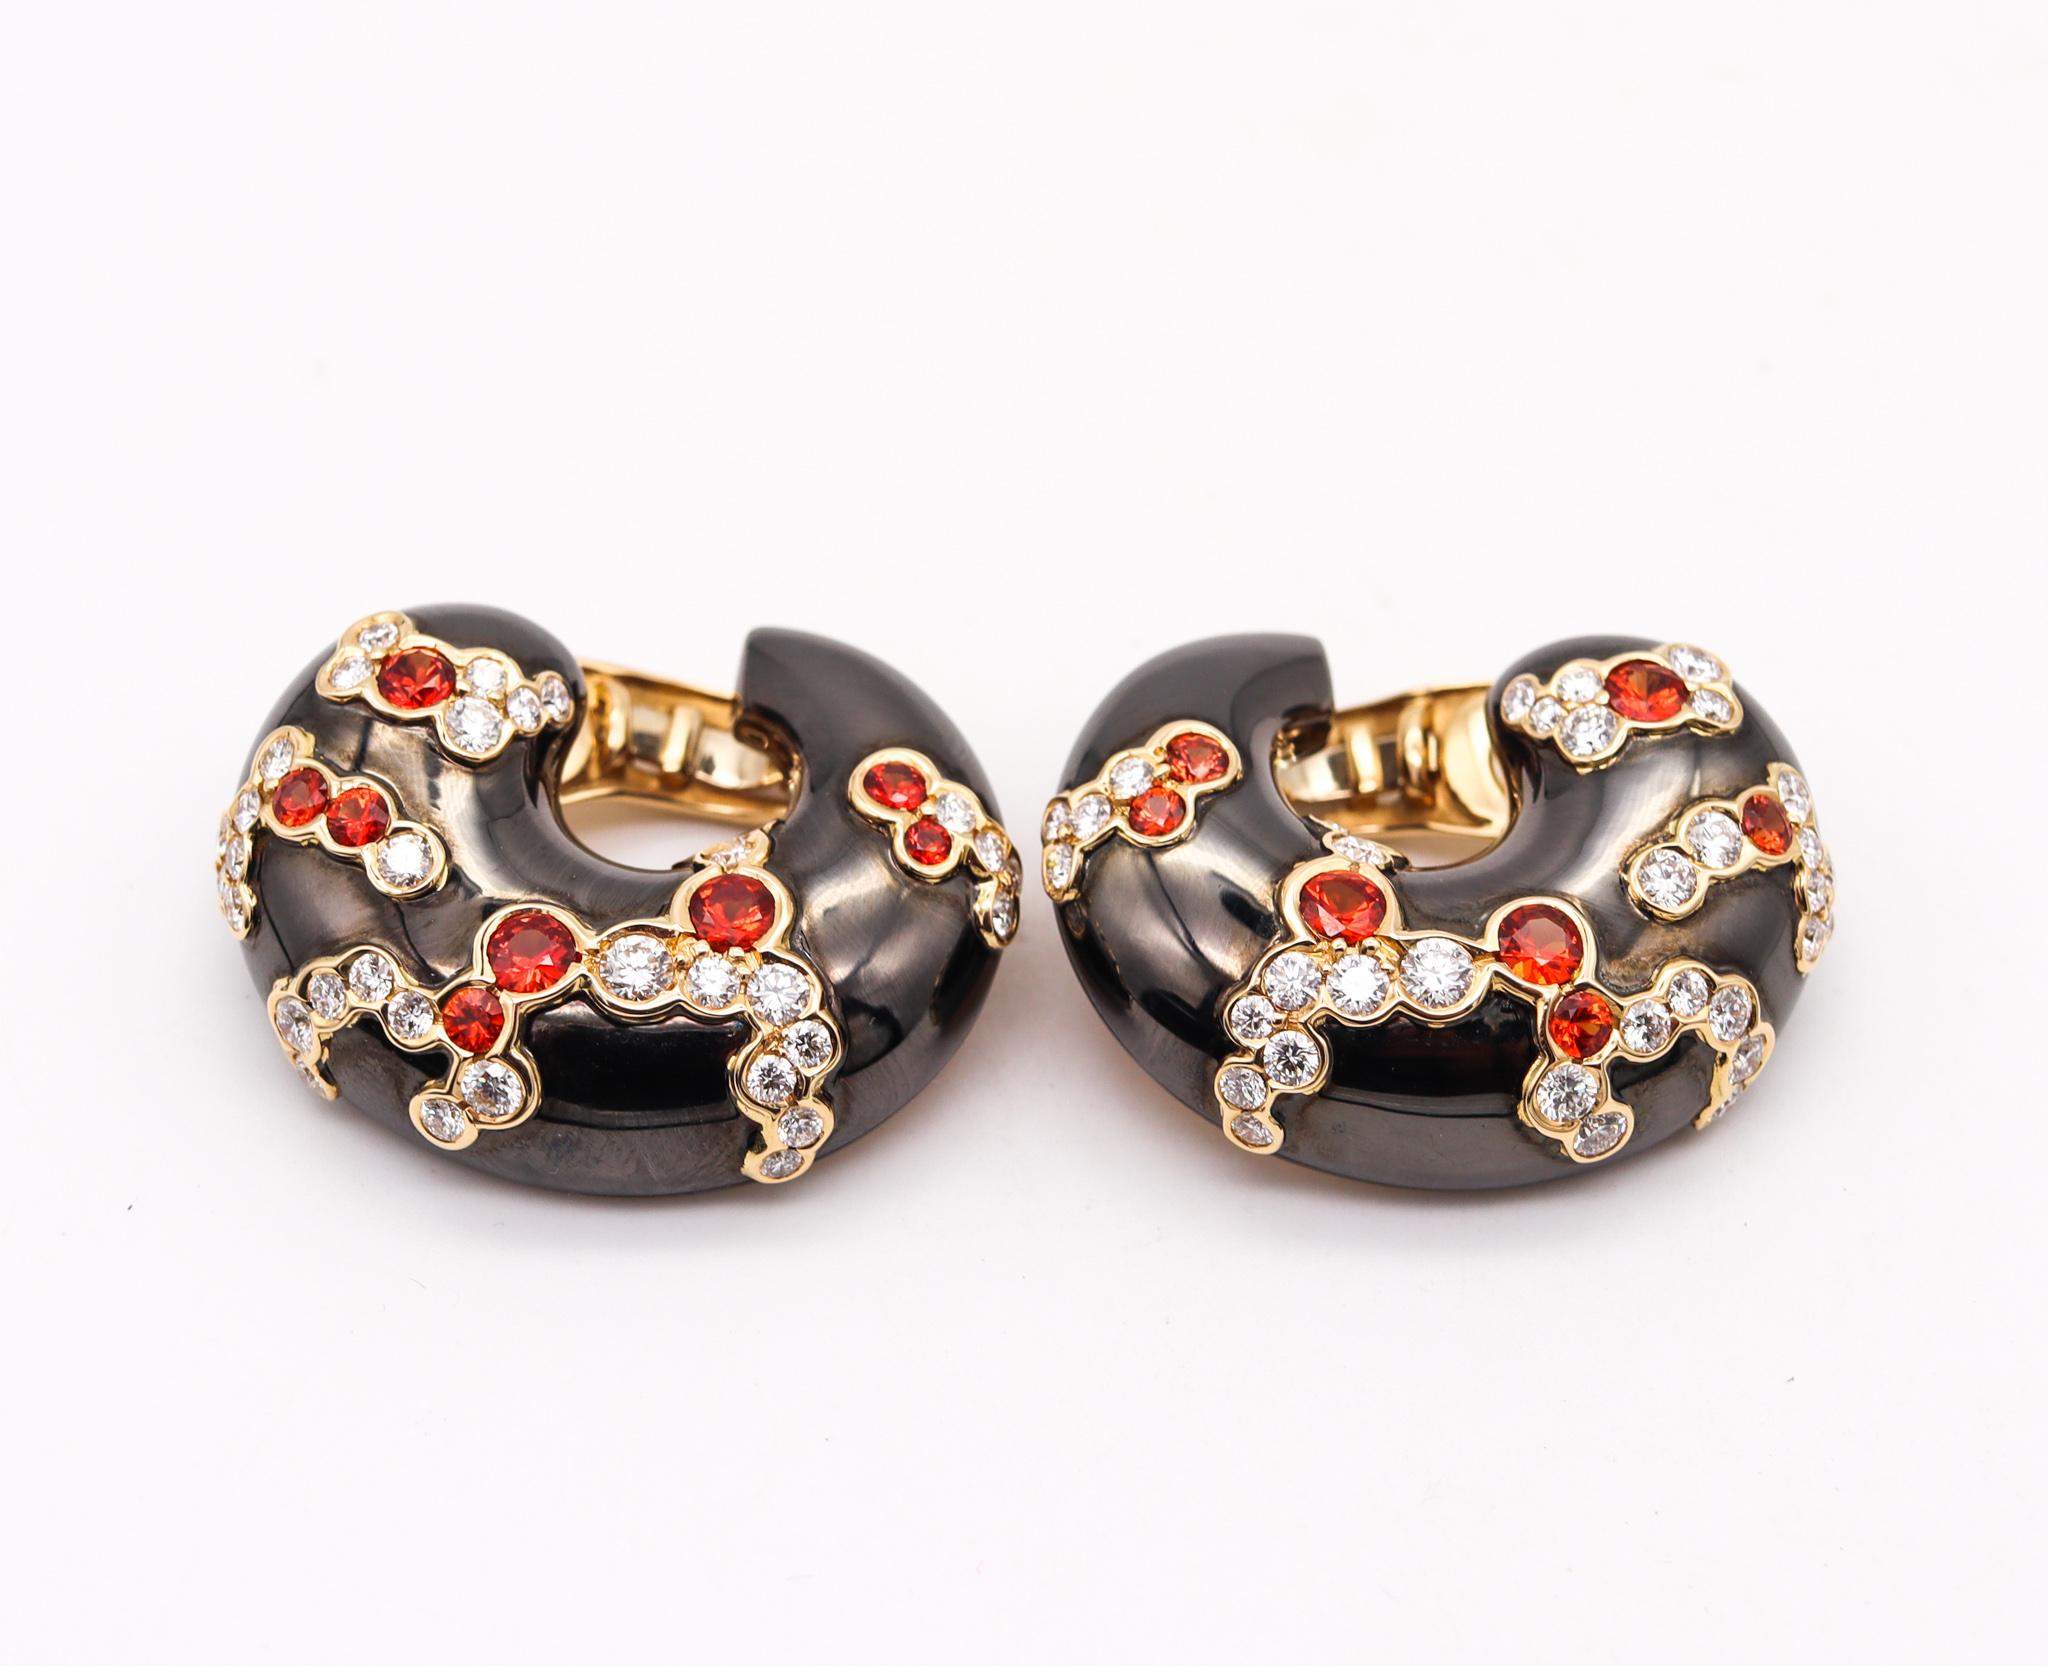 Modern Marina B. Milan Gem Set Earclips in 18Kt Gold with 8.26 Cts Diamonds & Sapphires